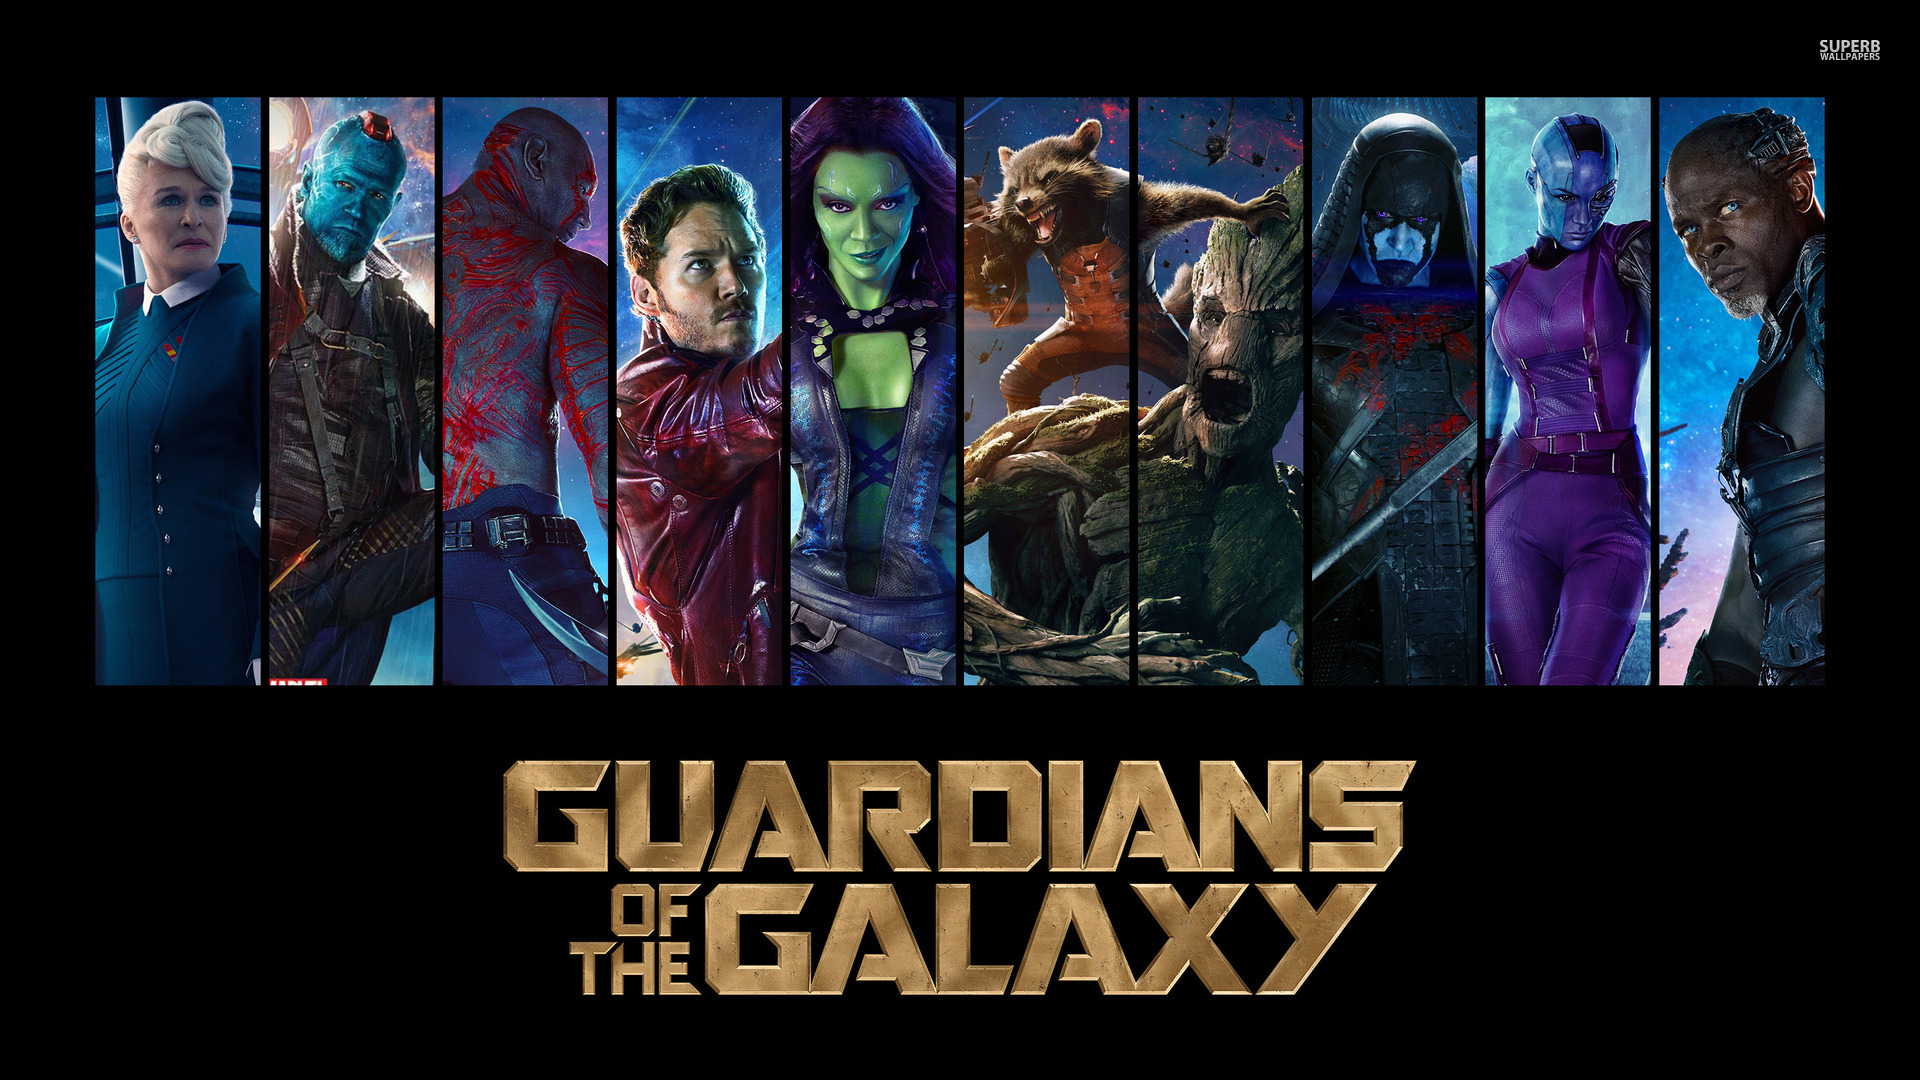 guardians of the galaxy wallpaper,movie,poster,album cover,font,action film